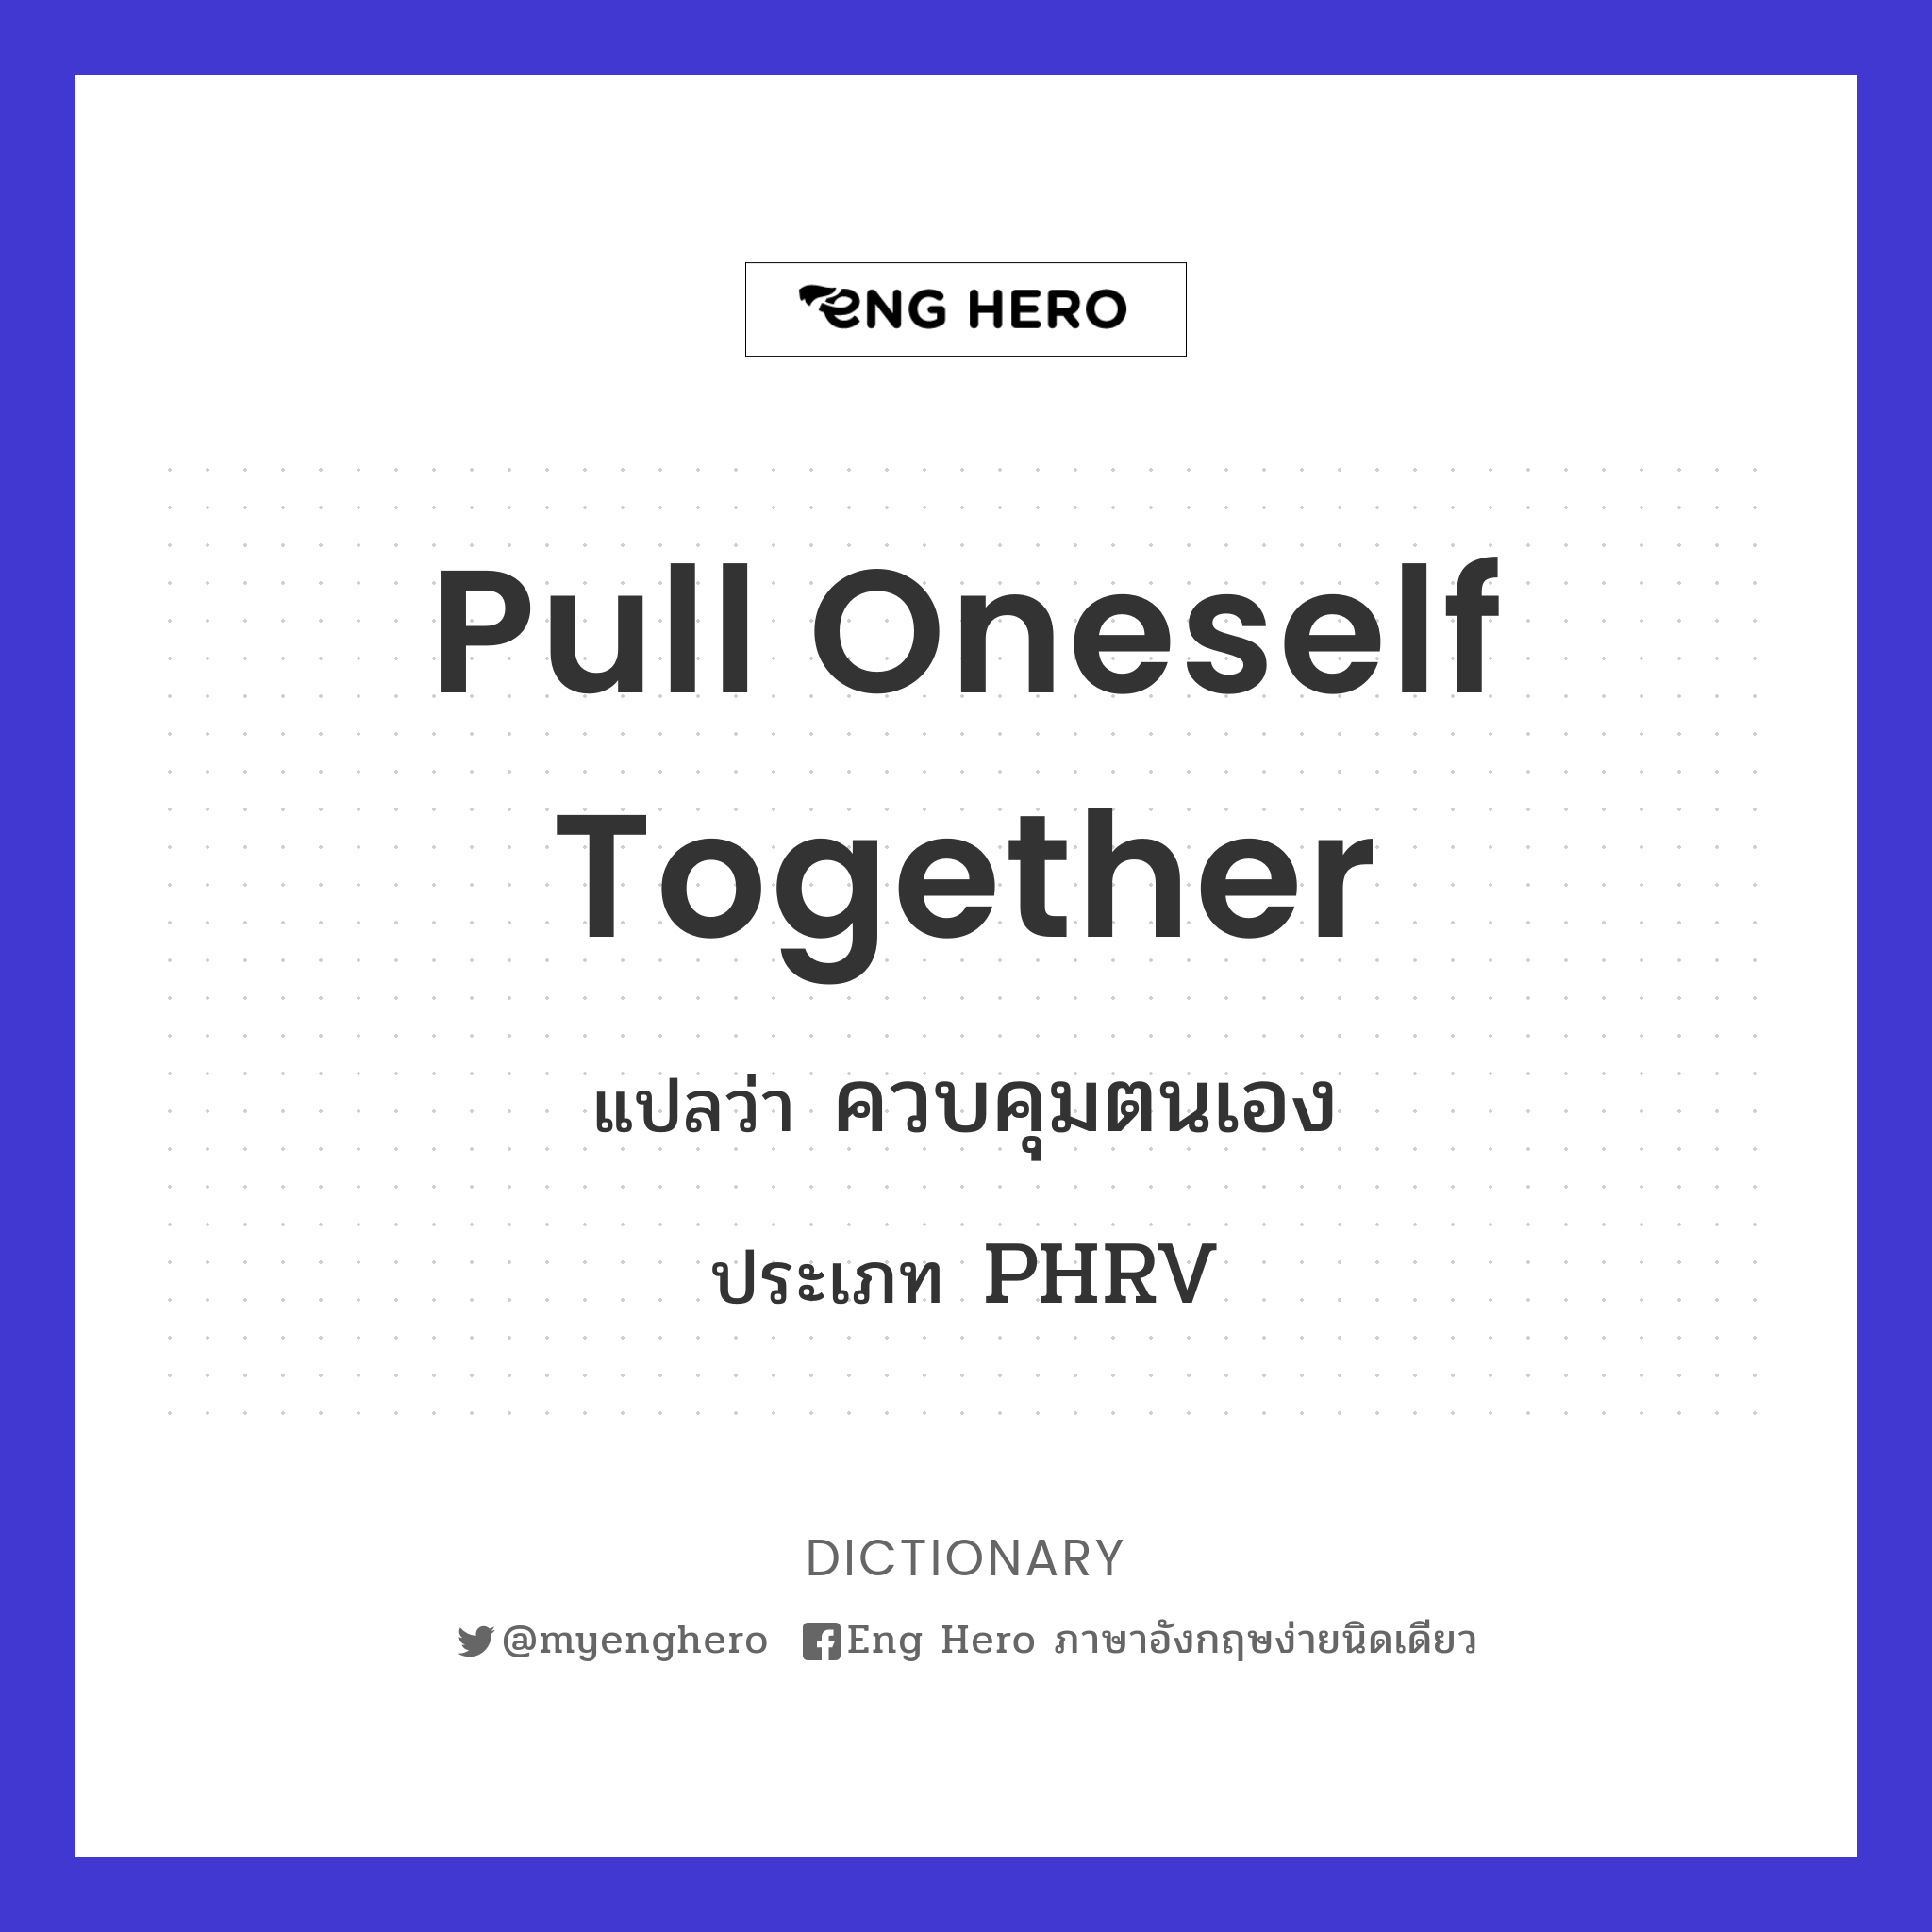 pull oneself together